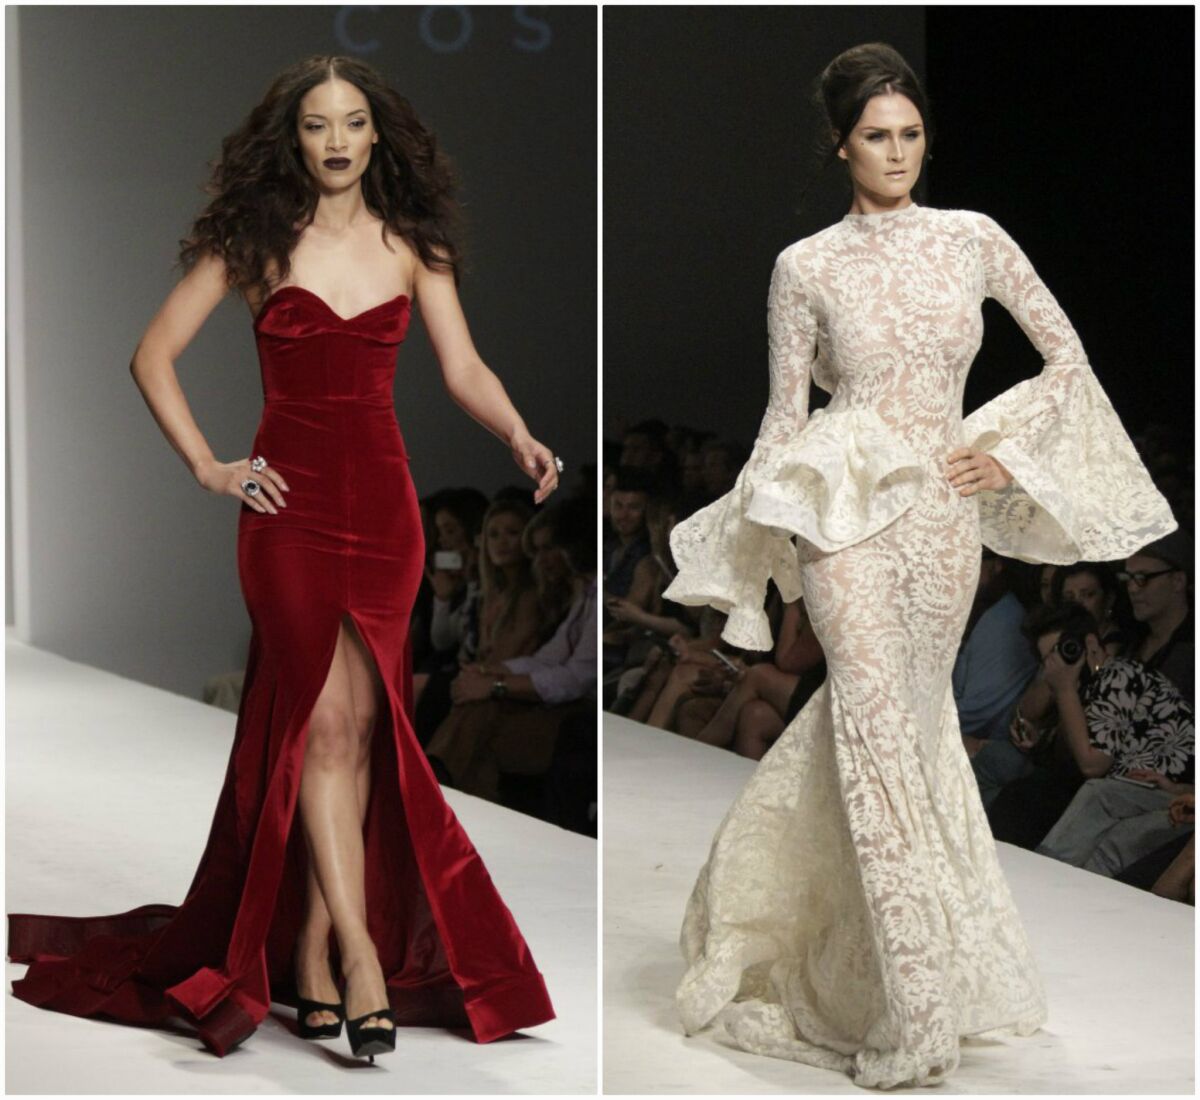 Looks from the MT Costello, left, and Michael Costello, right, runway collections presented Monday at Style Fashion Week in Los Angeles.